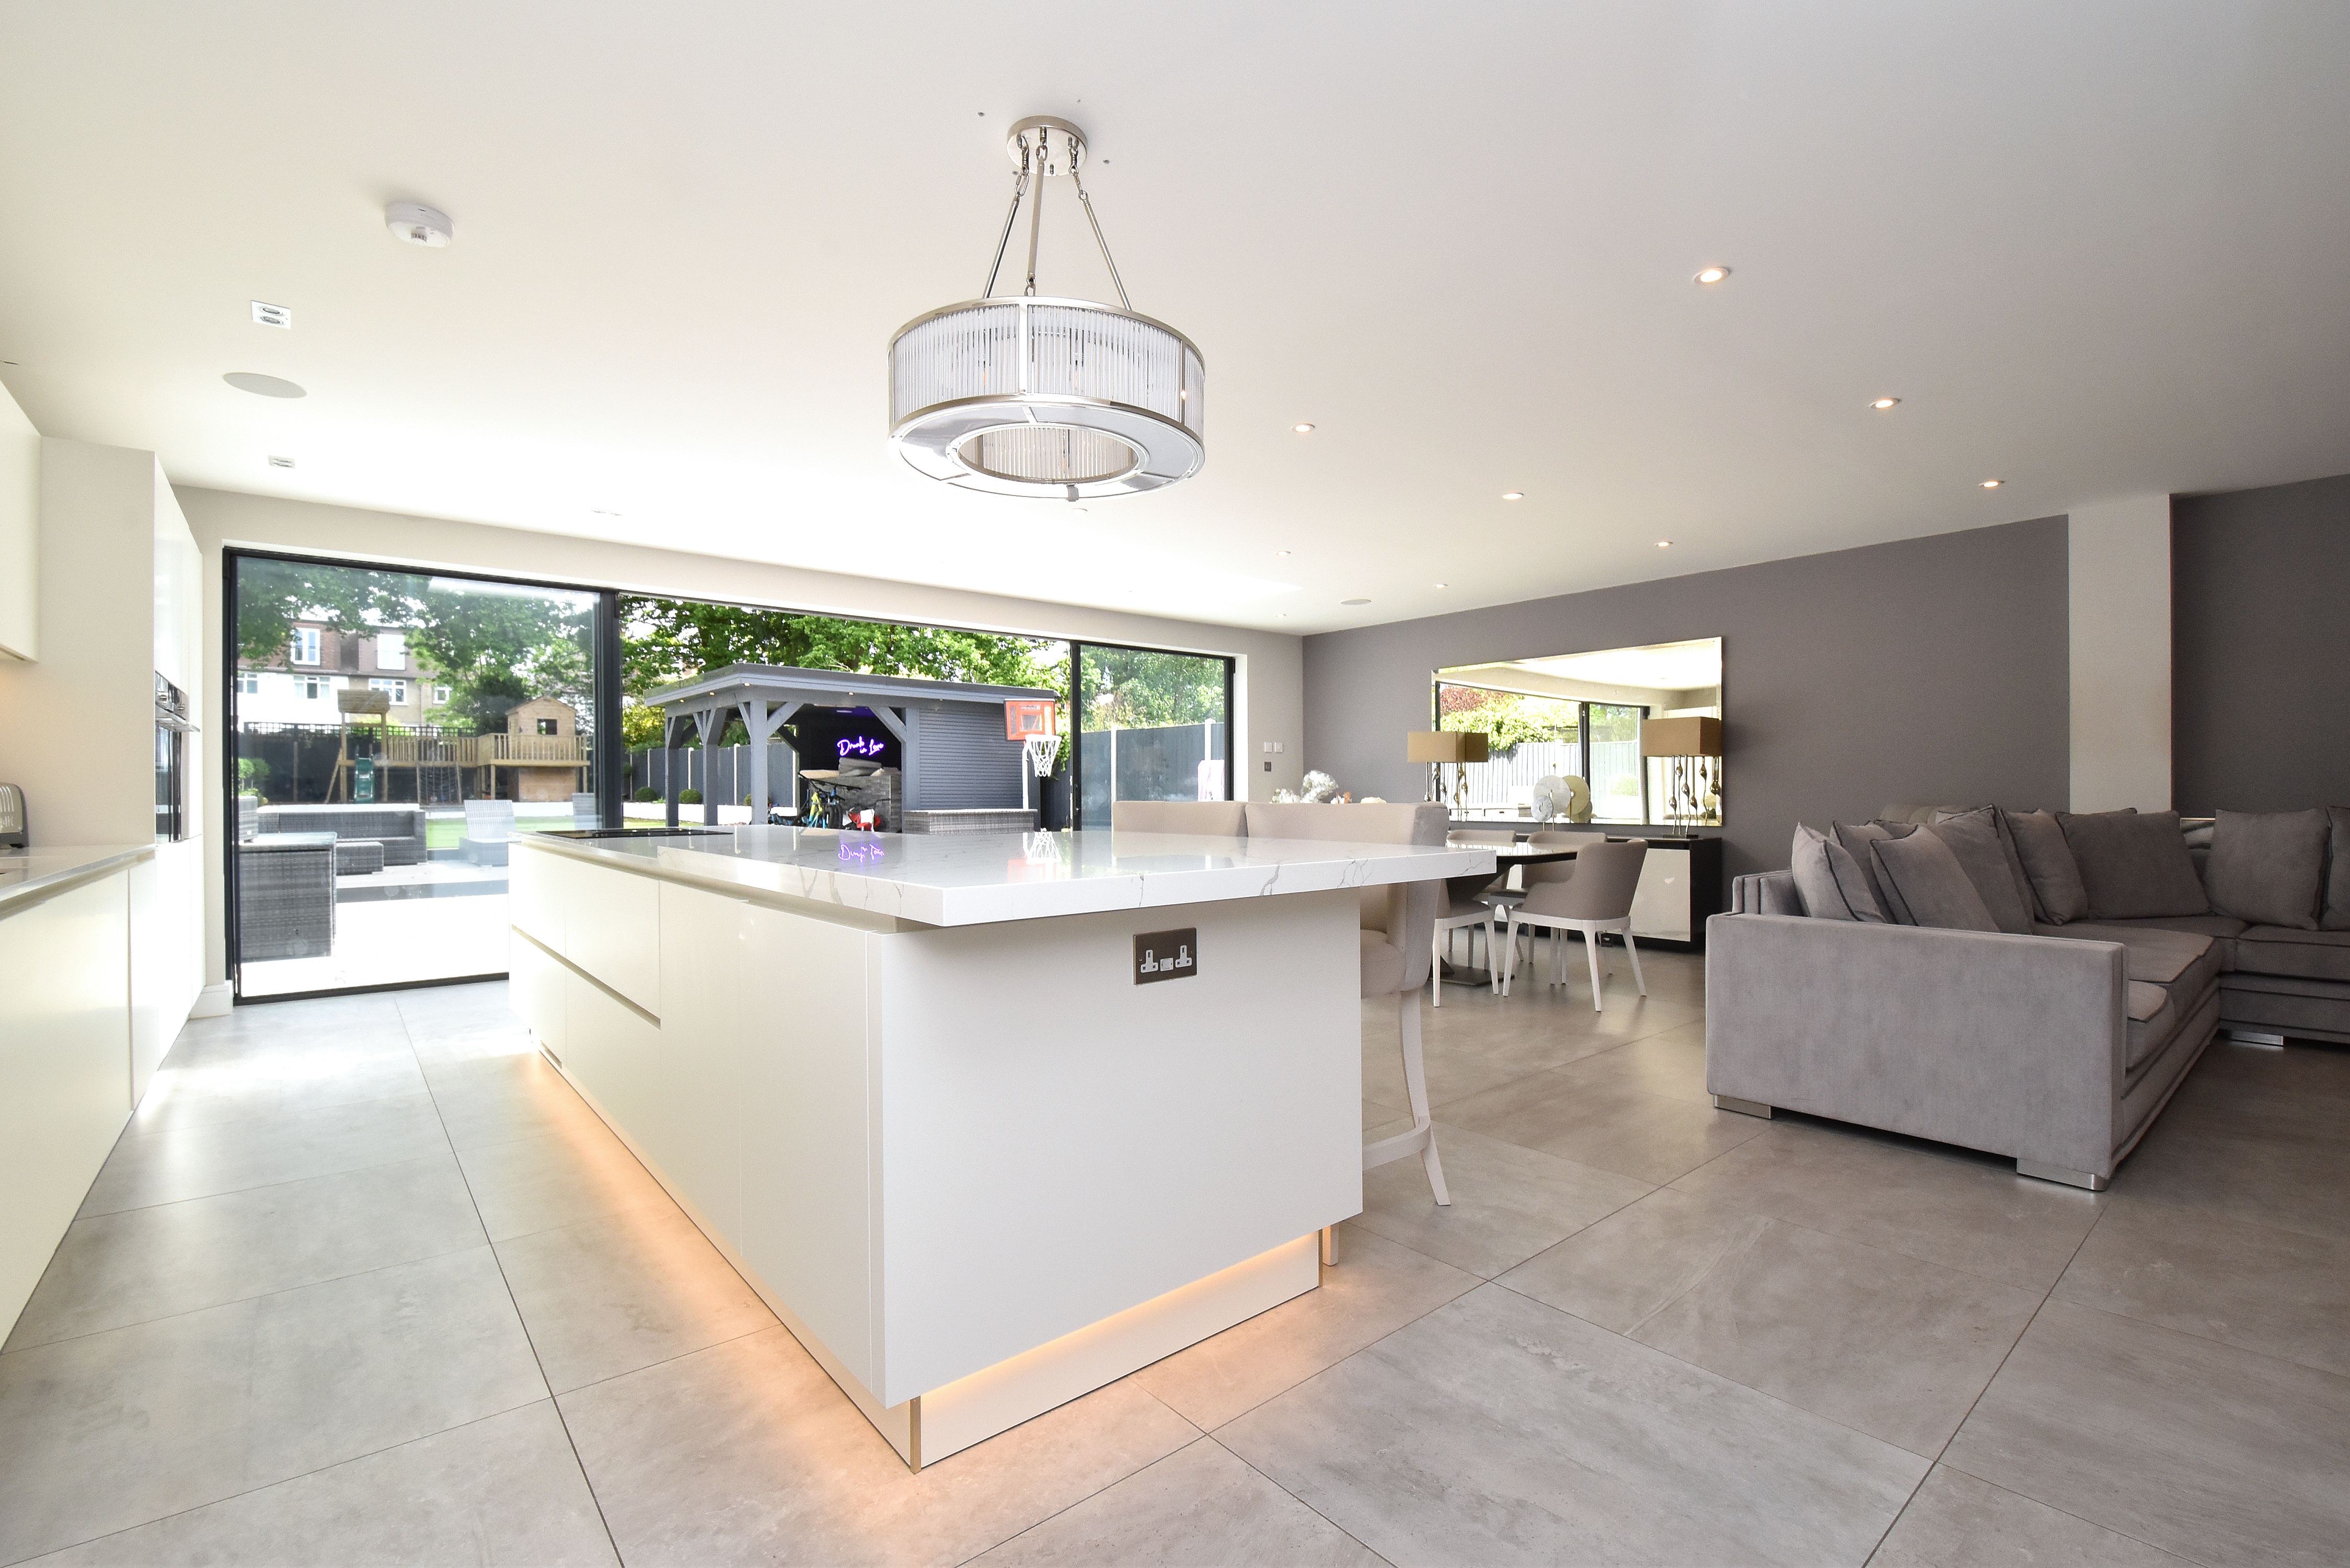 5 bed detached house for sale in Hayes Chase, West wickham  - Property Image 4